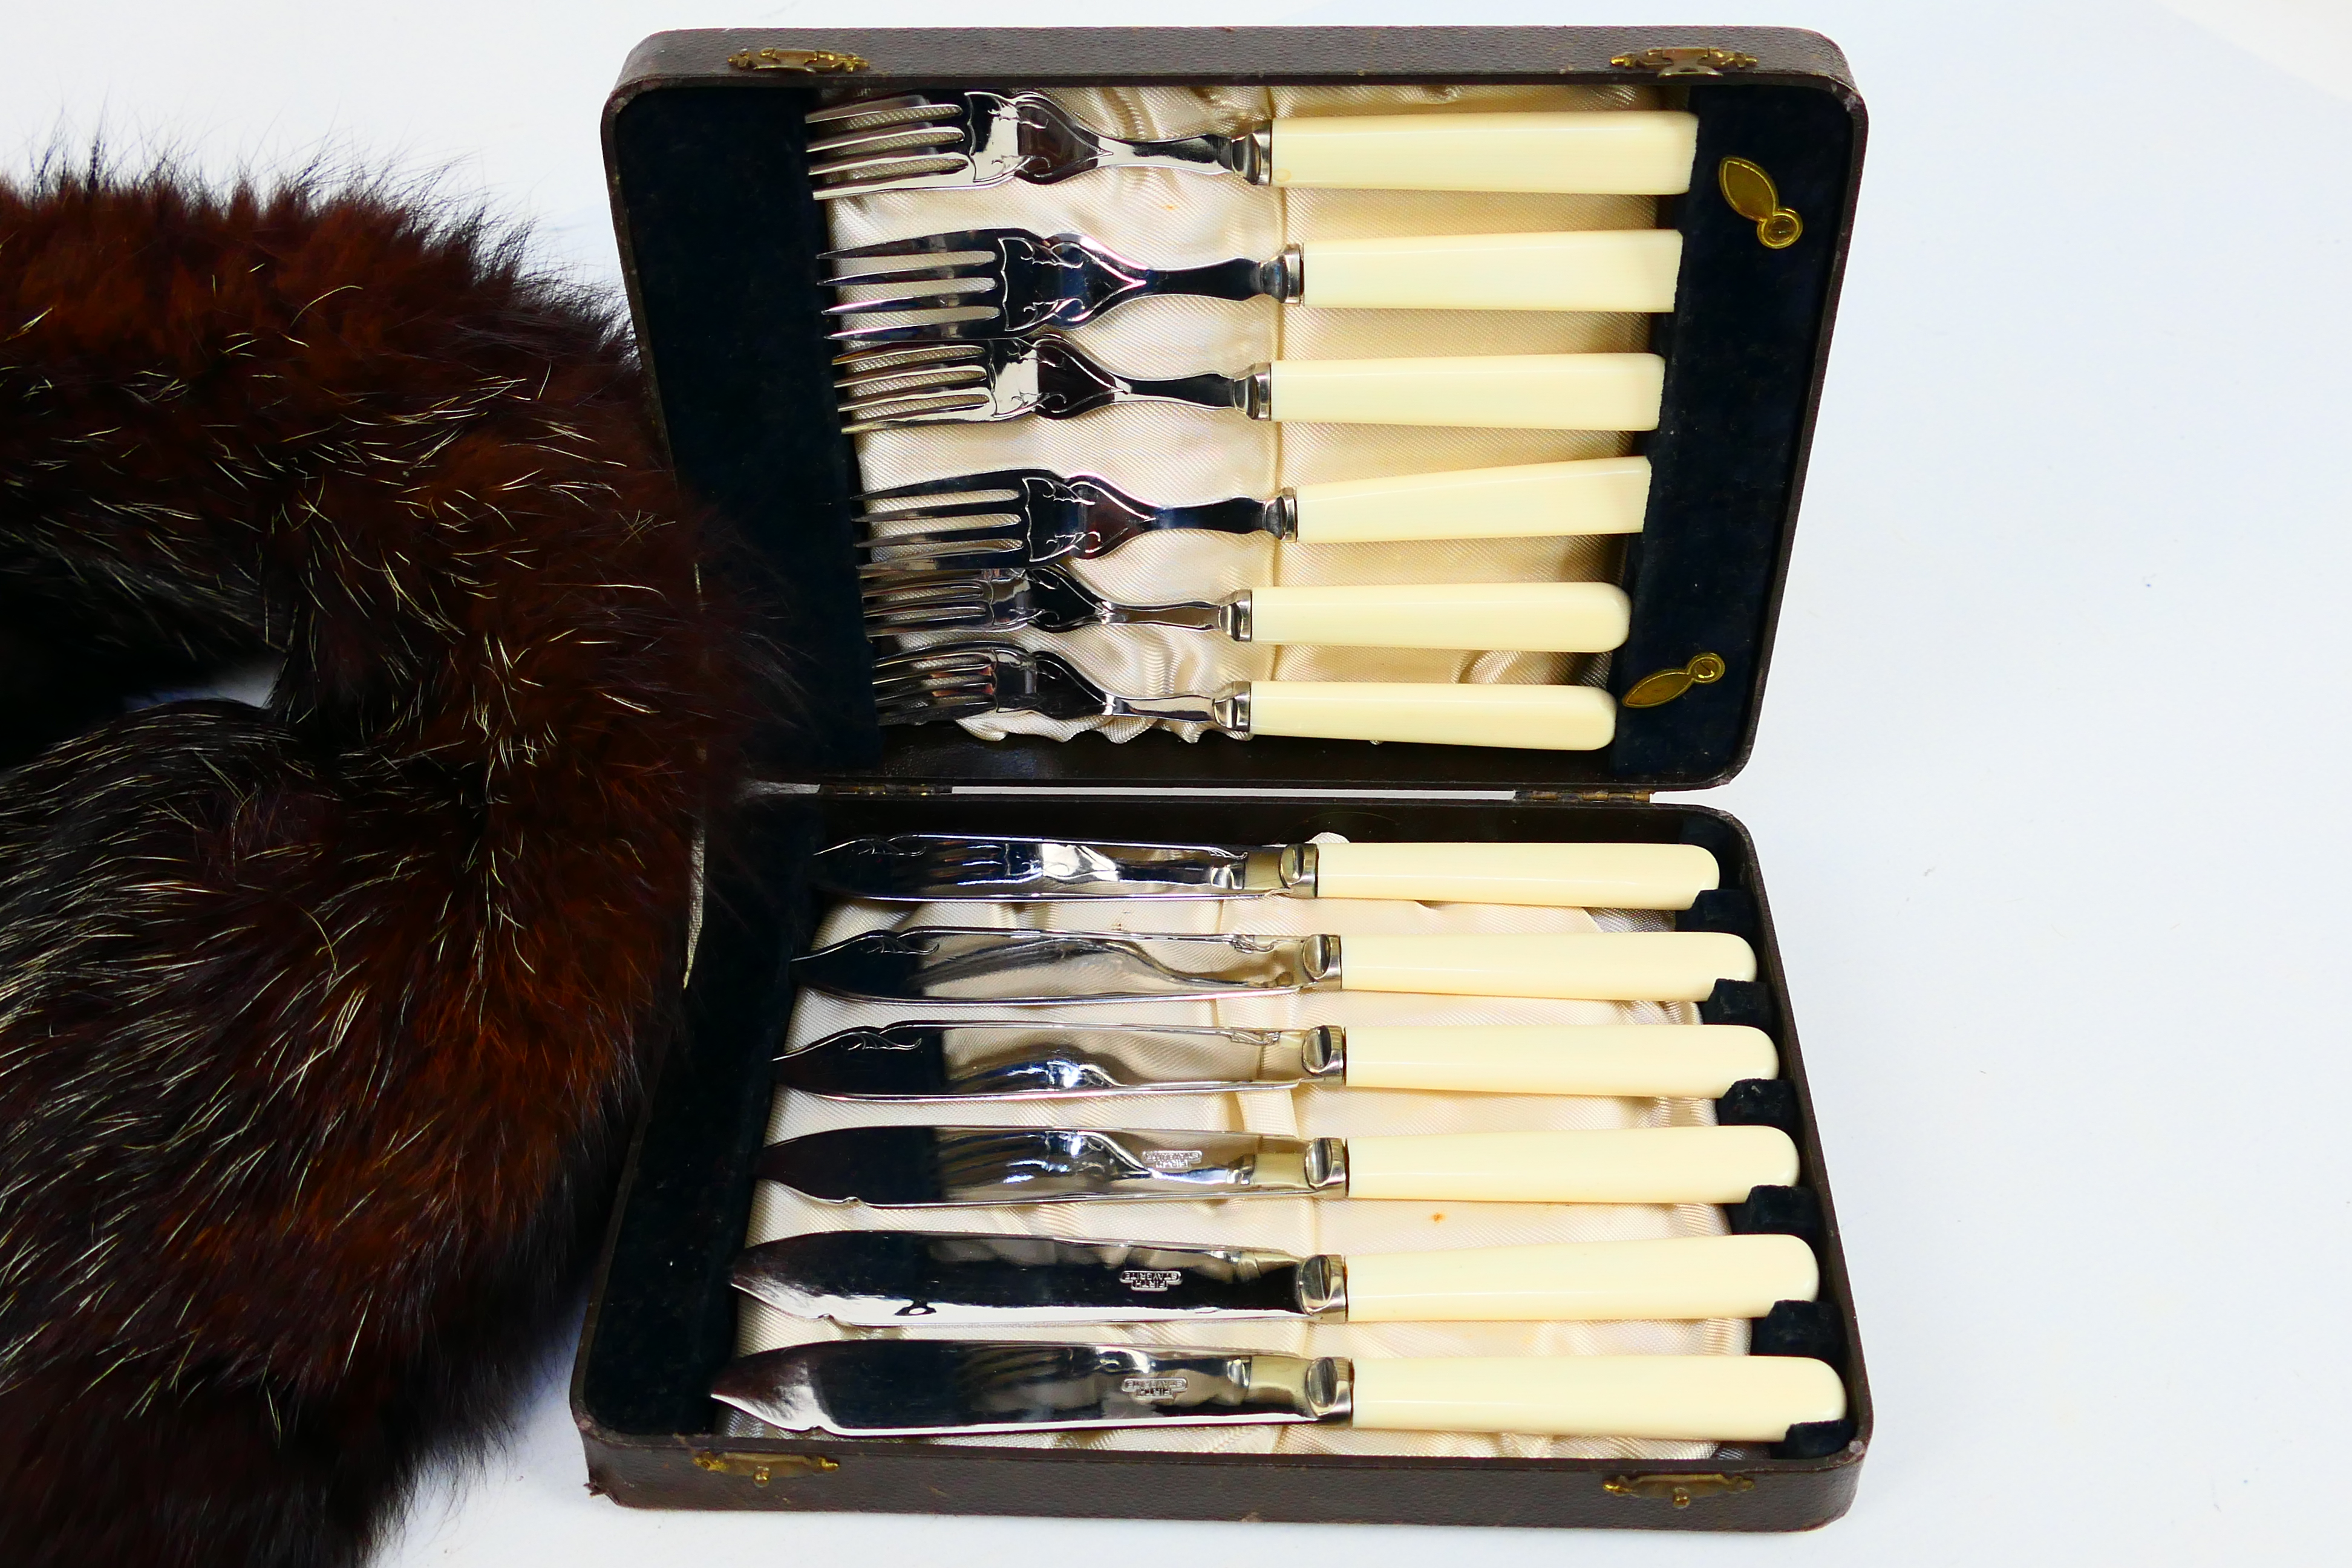 Cased flatware and a fur stole. - Image 2 of 4